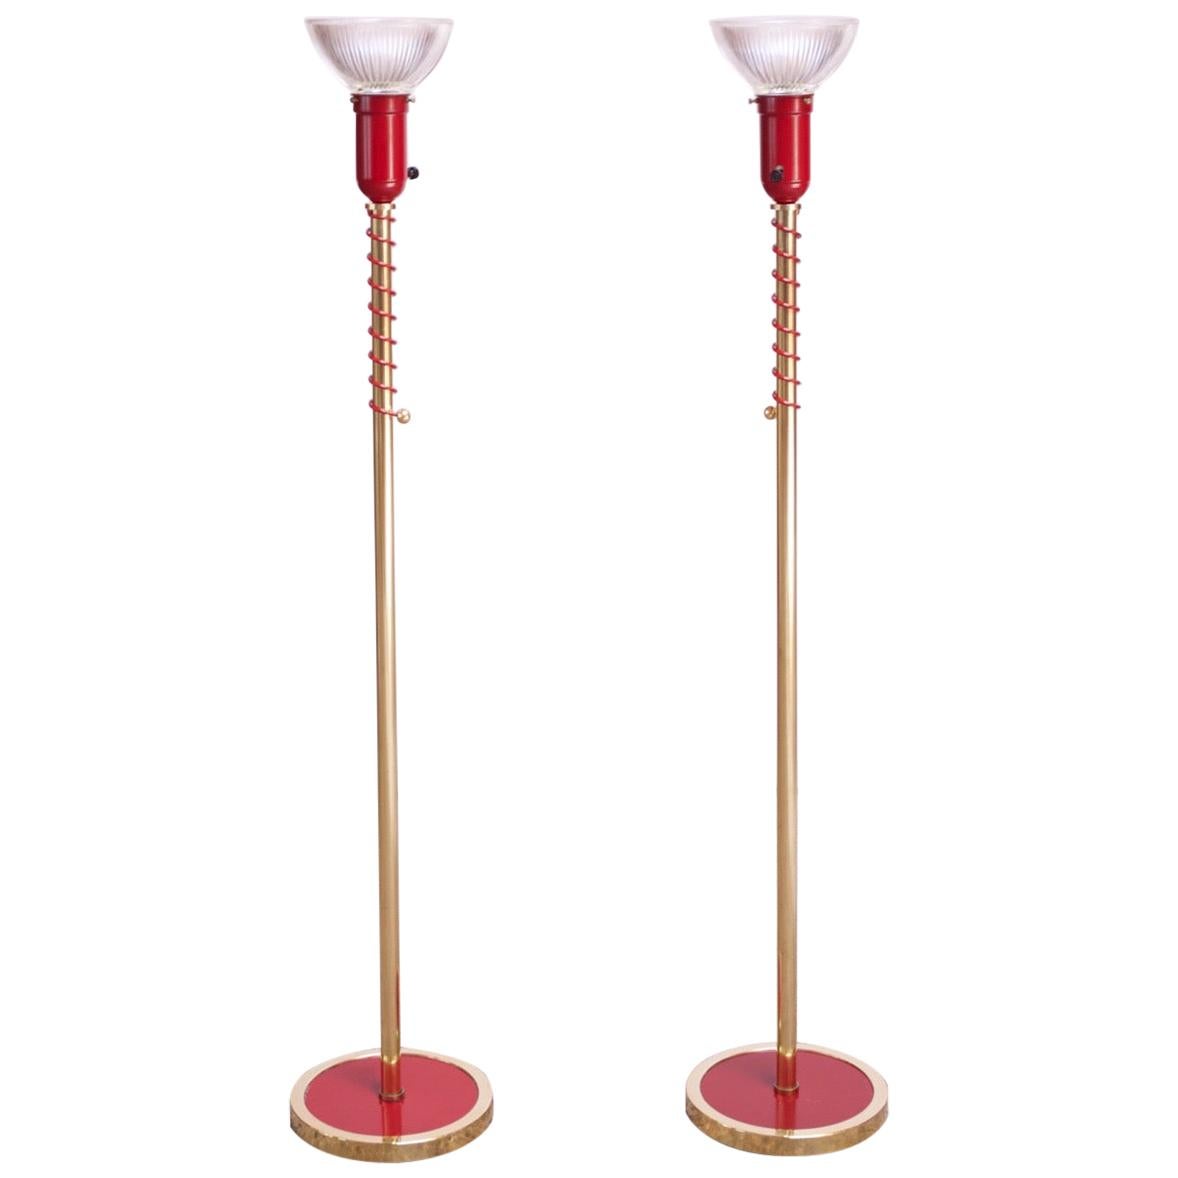 Pair of Lightolier Floor Lamps in Polished Brass and Painted Metal